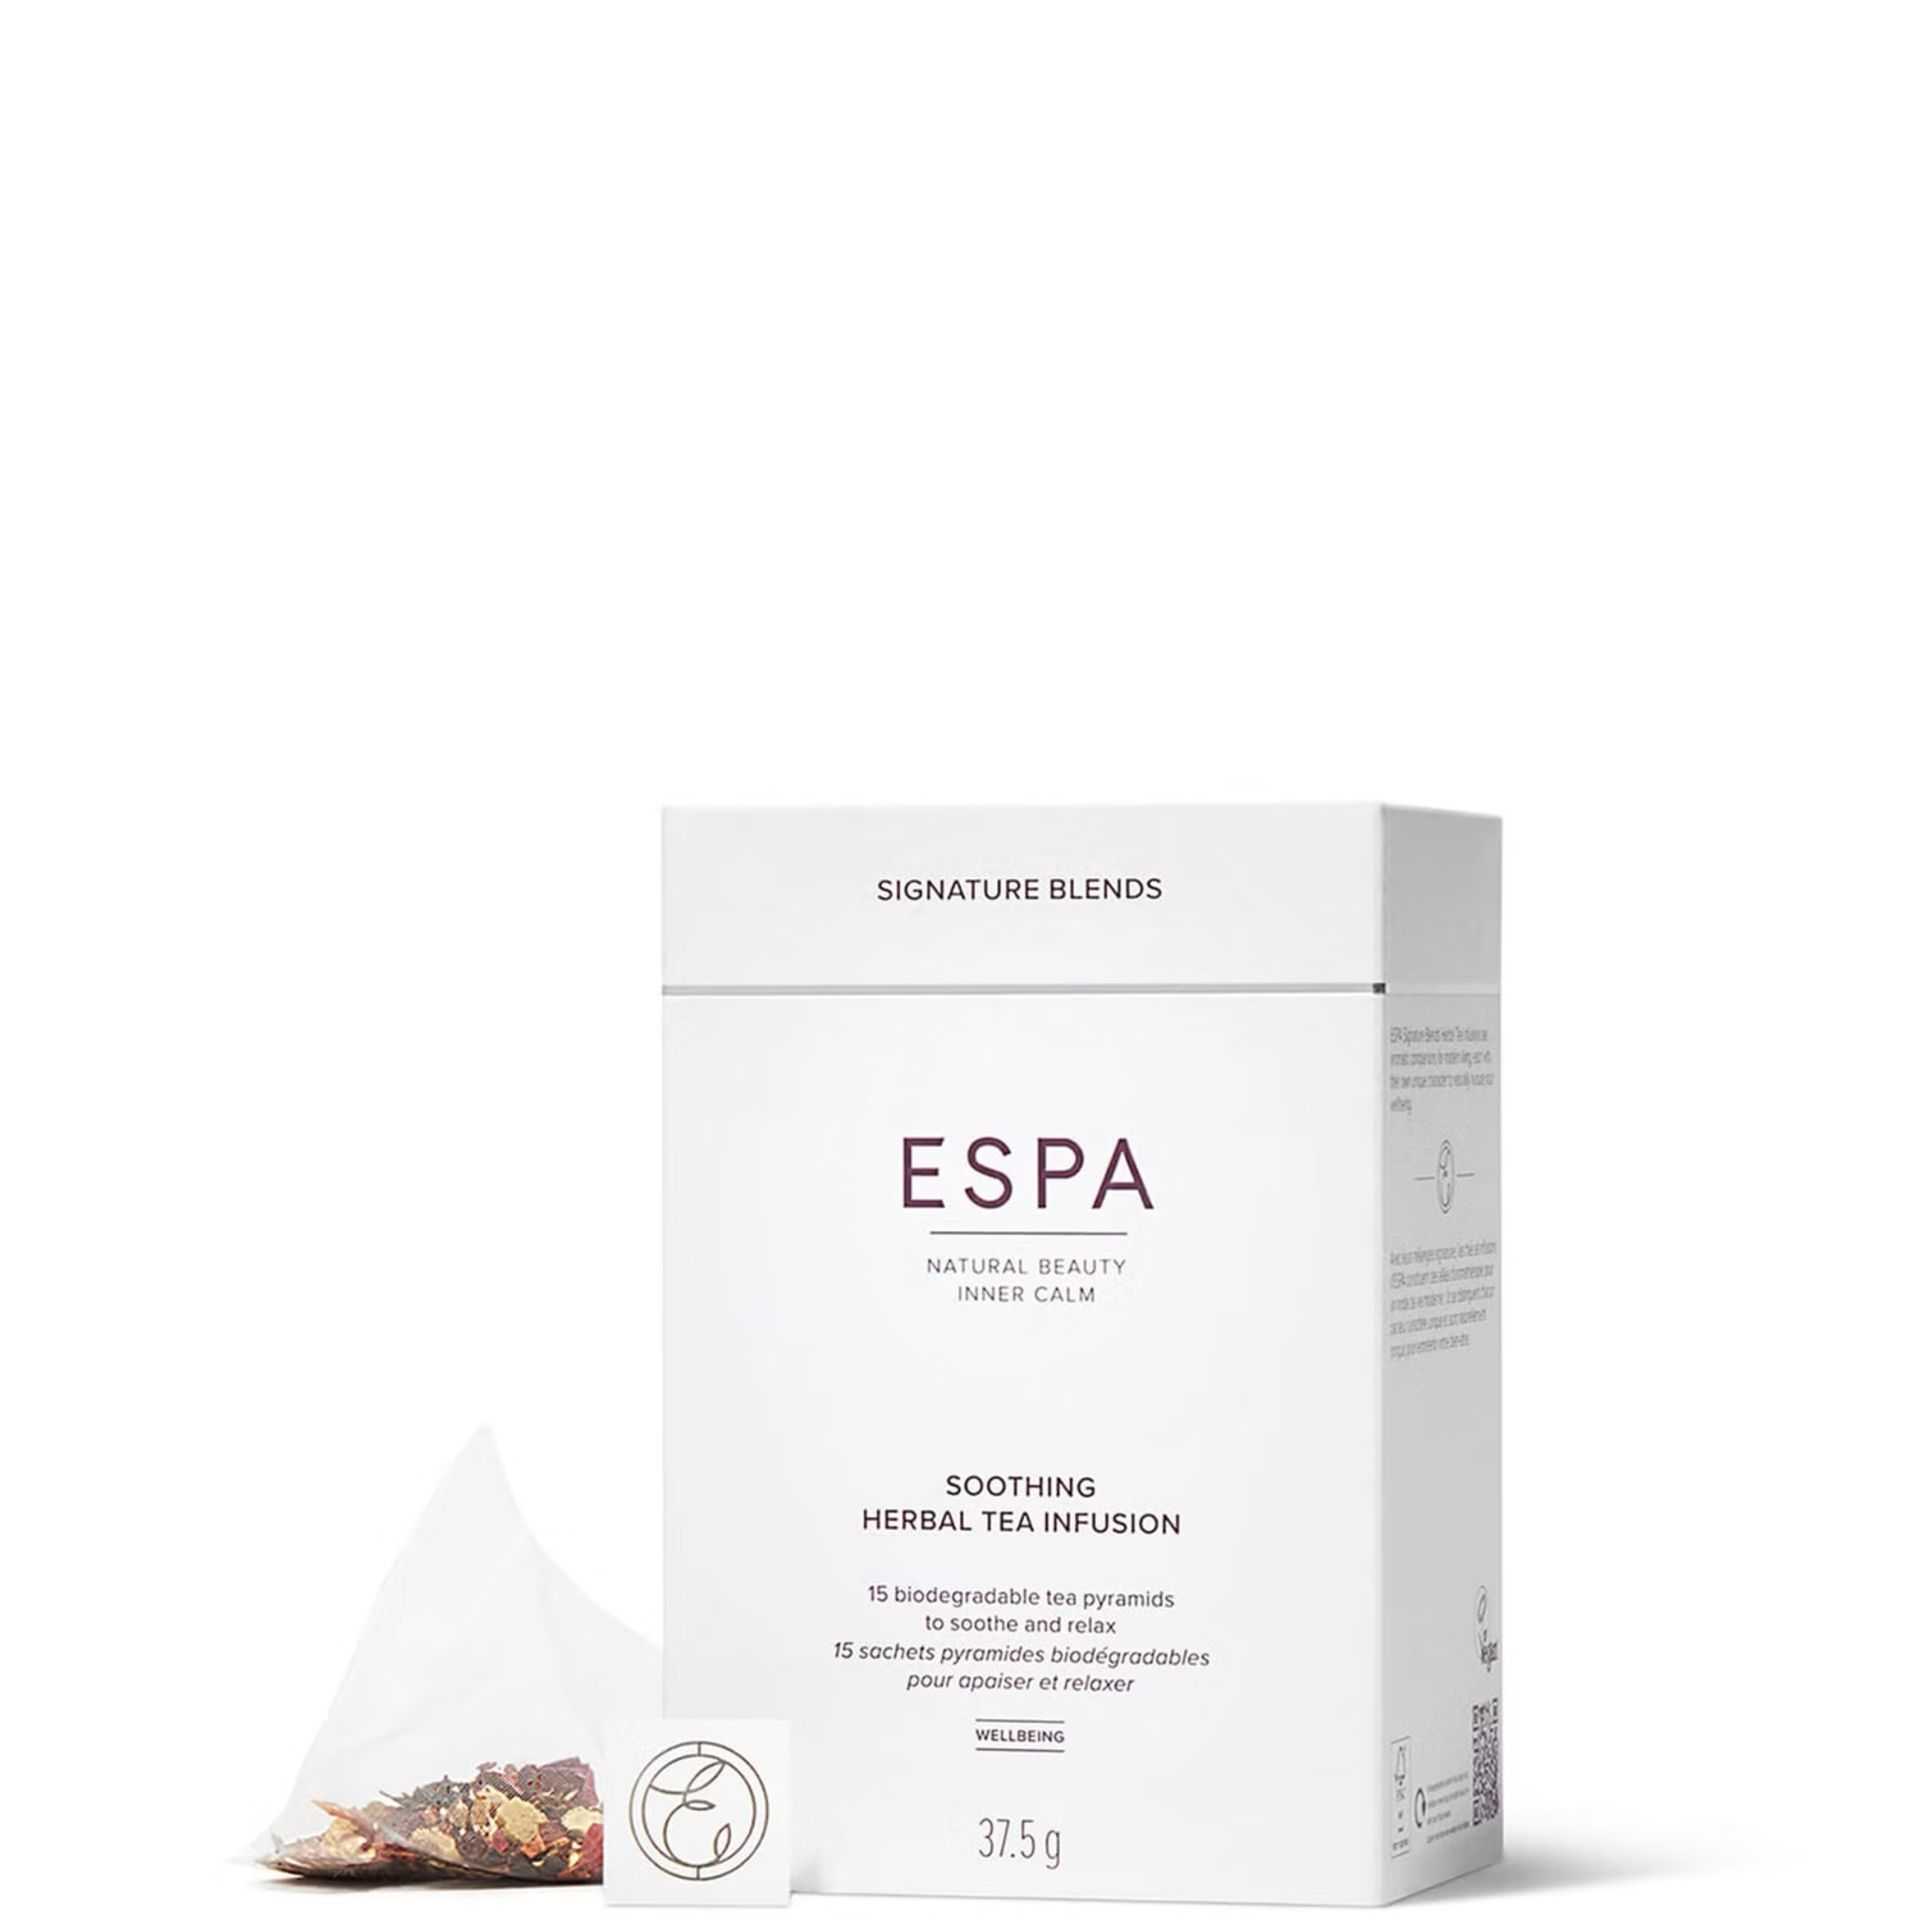 20x NEW & BOXED ESPA Soothing Herbal Tea Infusion 37.5g. RRP £15 EACH. (EBR1). The compassionate